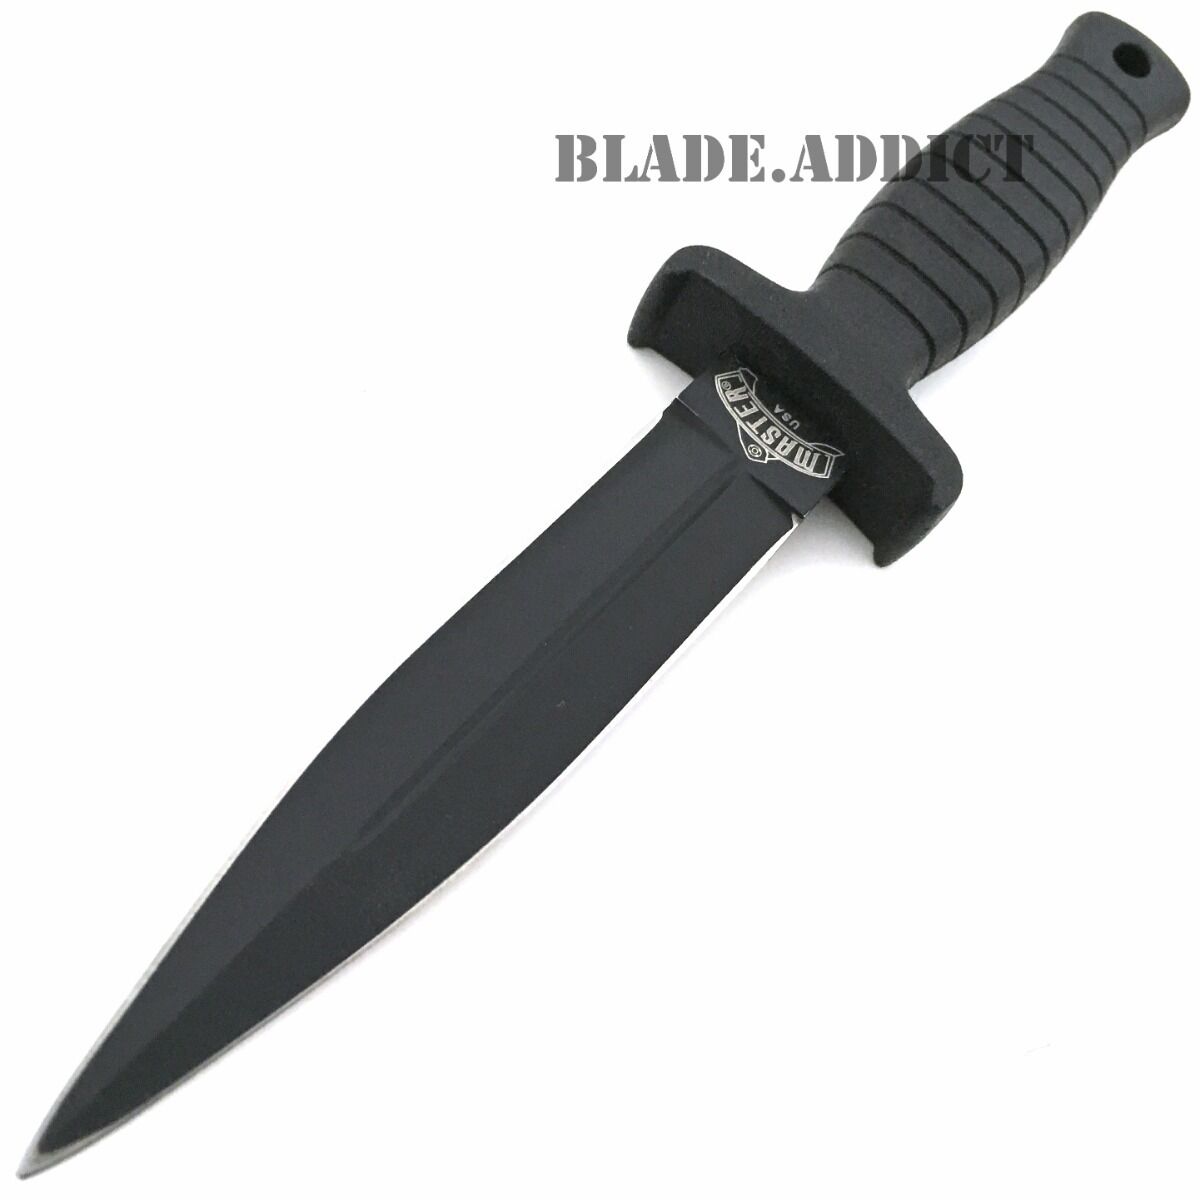 7" Double Edge Military Tactical Hunting Dagger Boot Neck Knife + Fire Starter Black